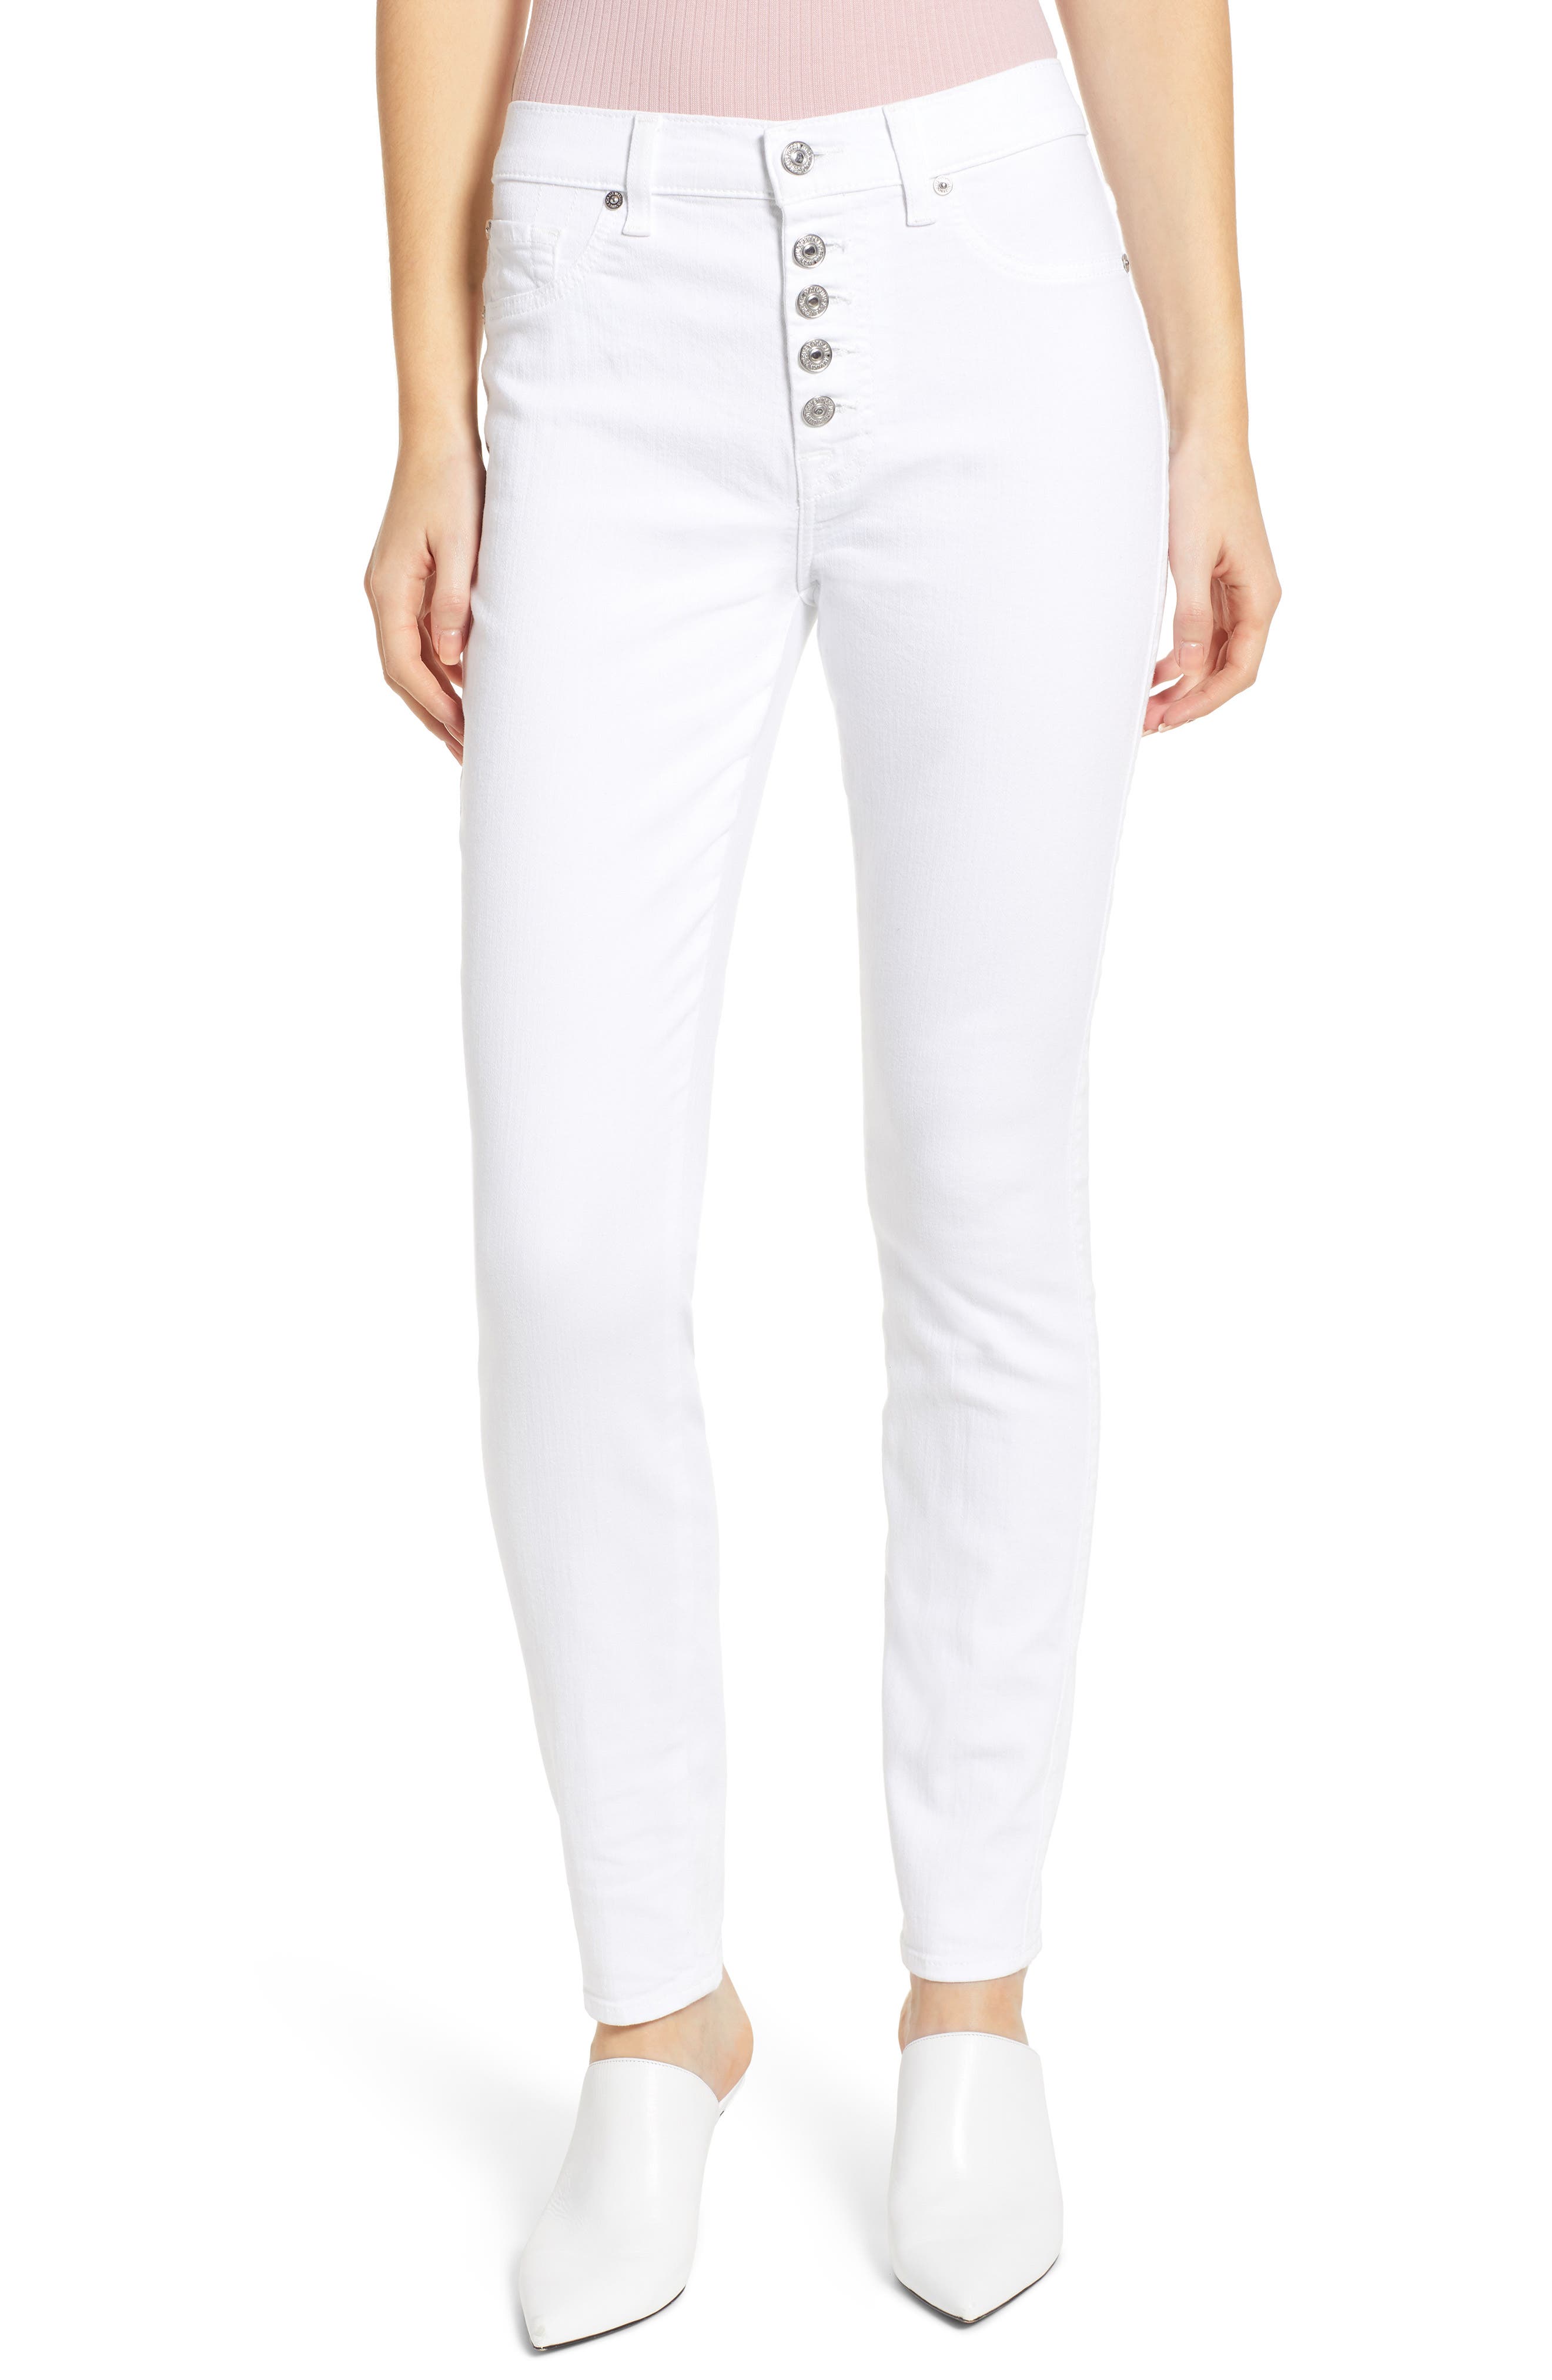 Women's 7 For All Mankind Jeans